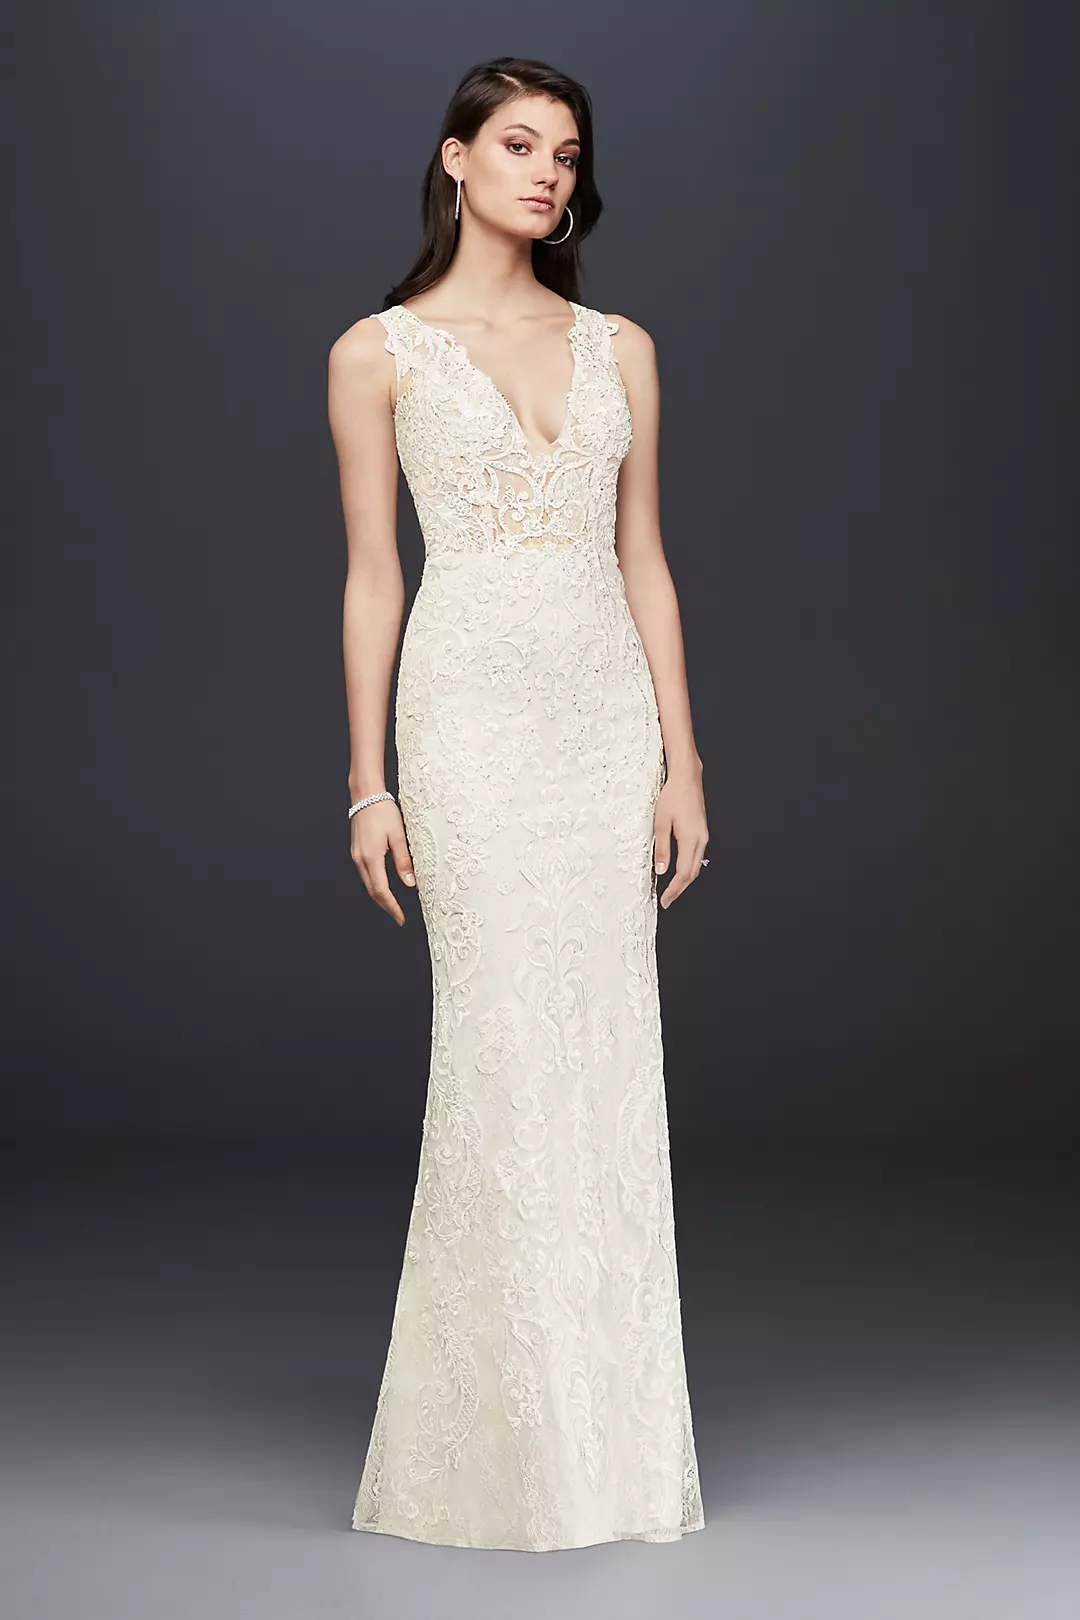 As-Is Plunging Illusion Bodice Lace Wedding Dress  Image